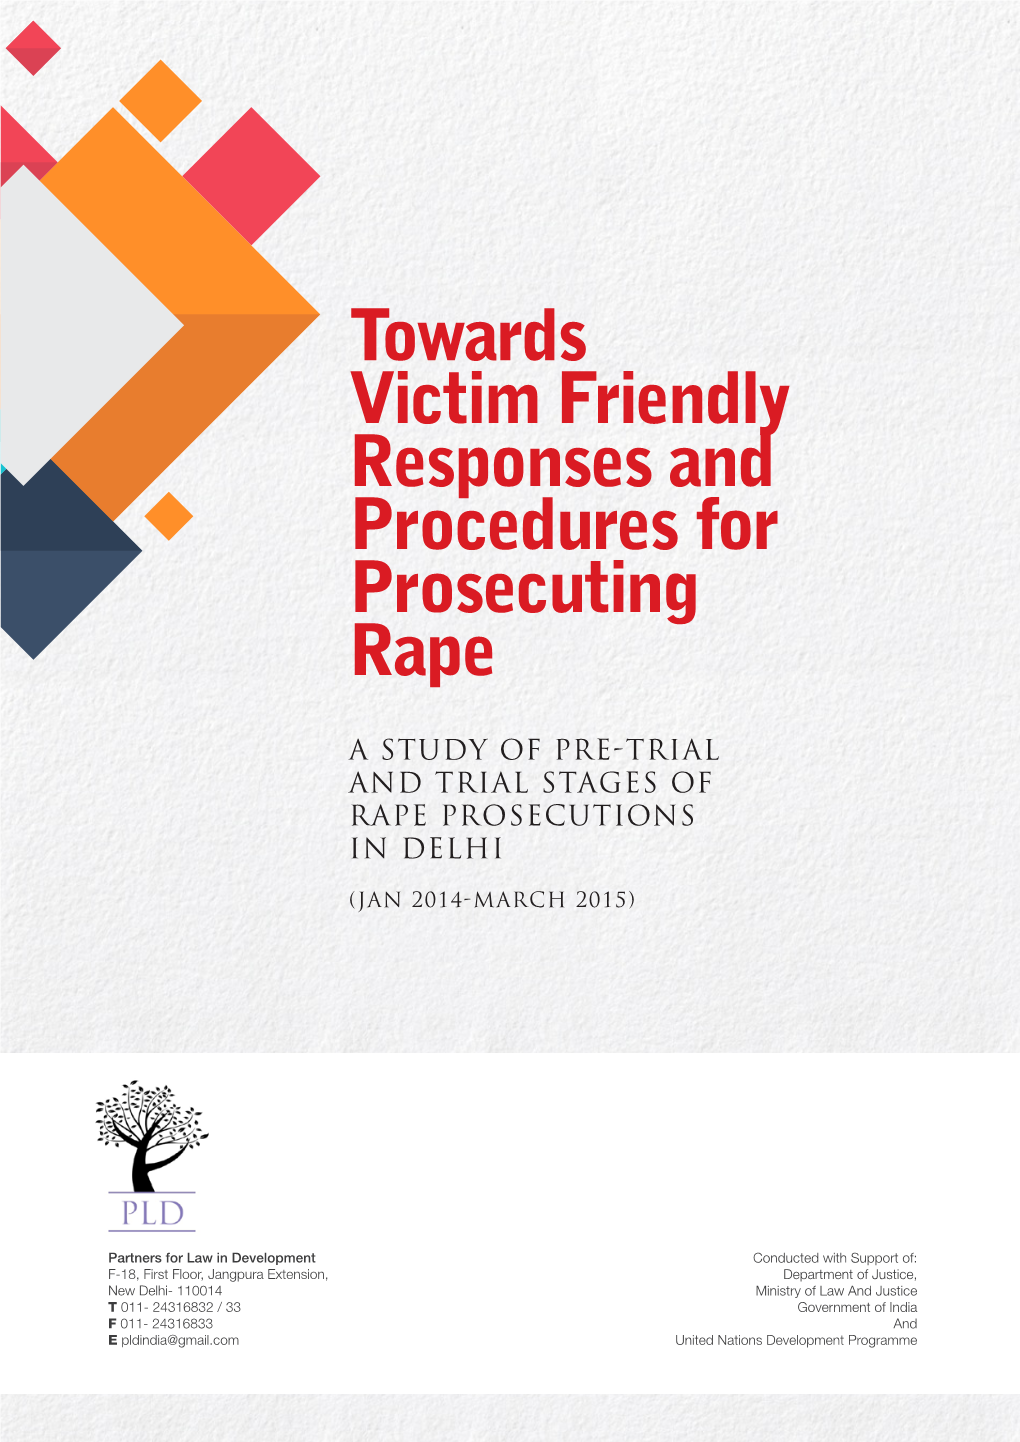 Towards Victim Friendly Responses and Procedures for Prosecuting Rape